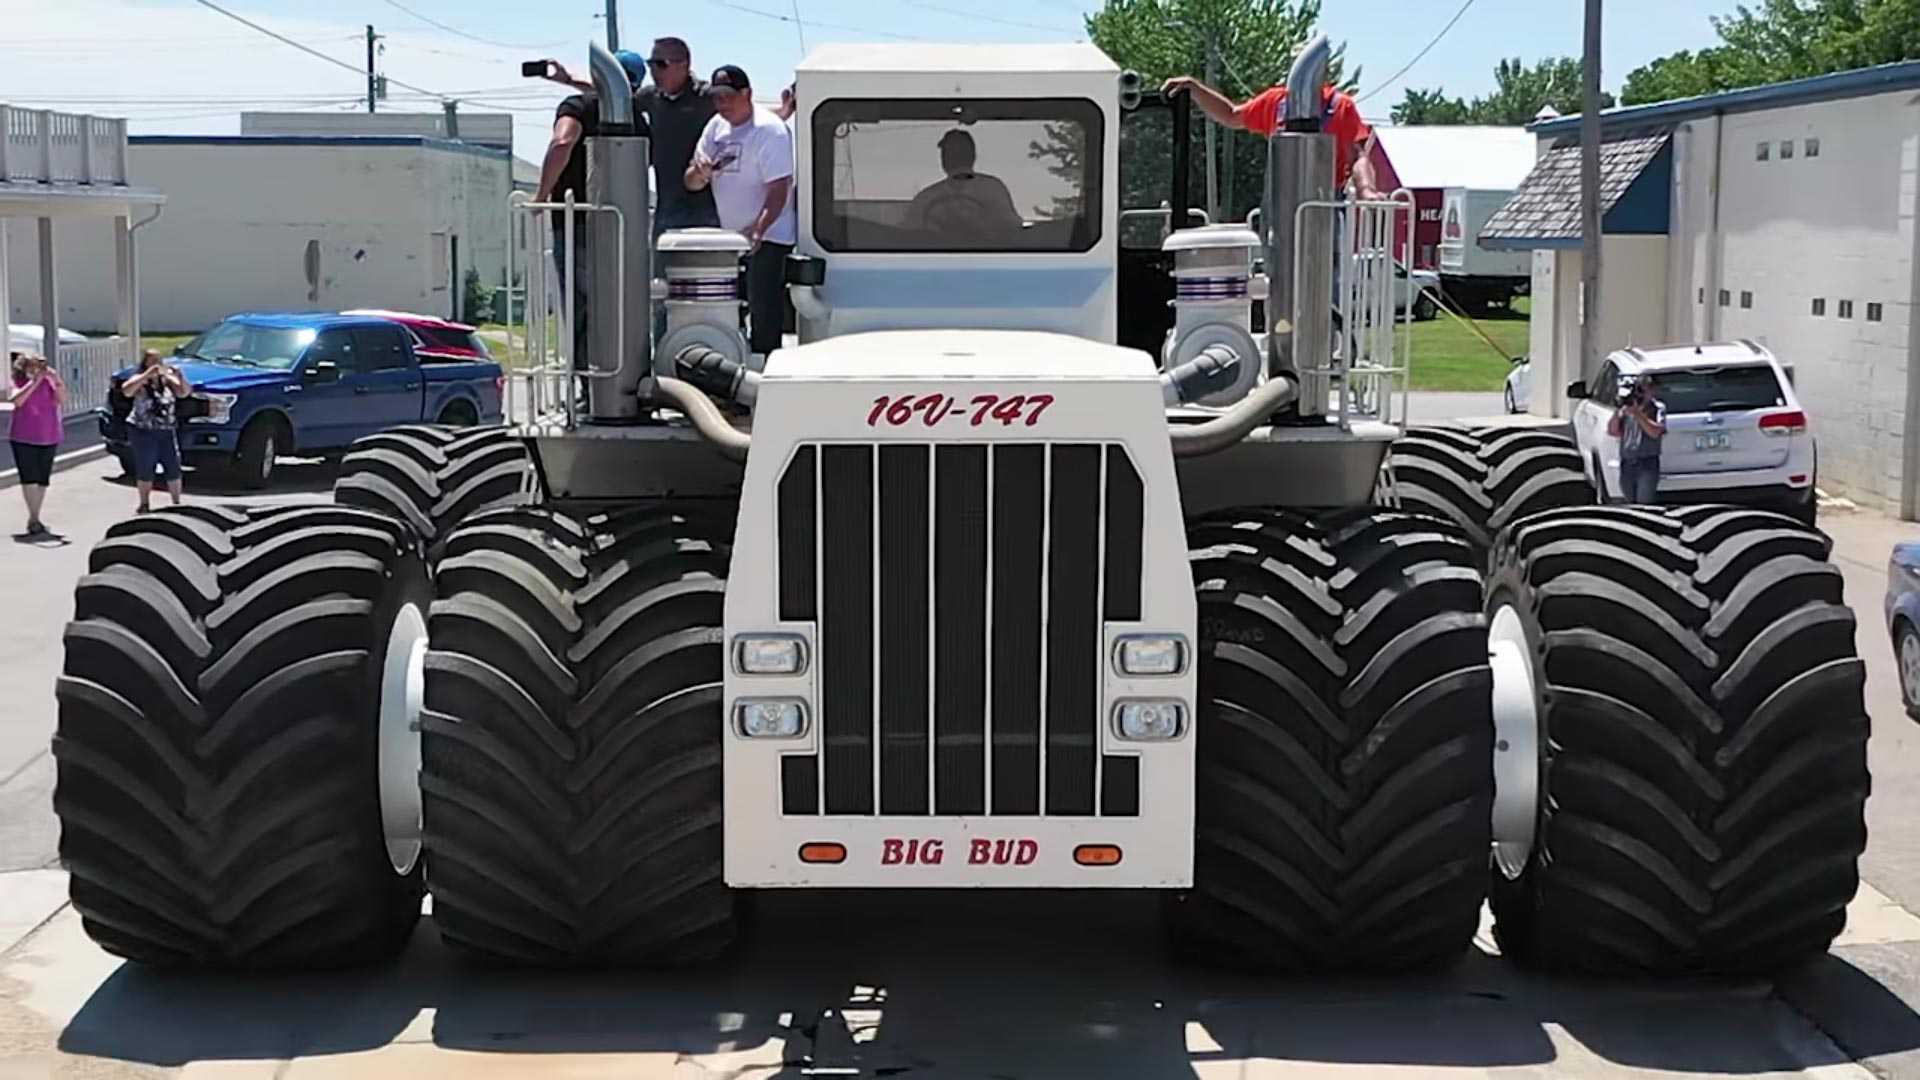 The world’s largest tractor tires on Big Bud Tractor driving down street